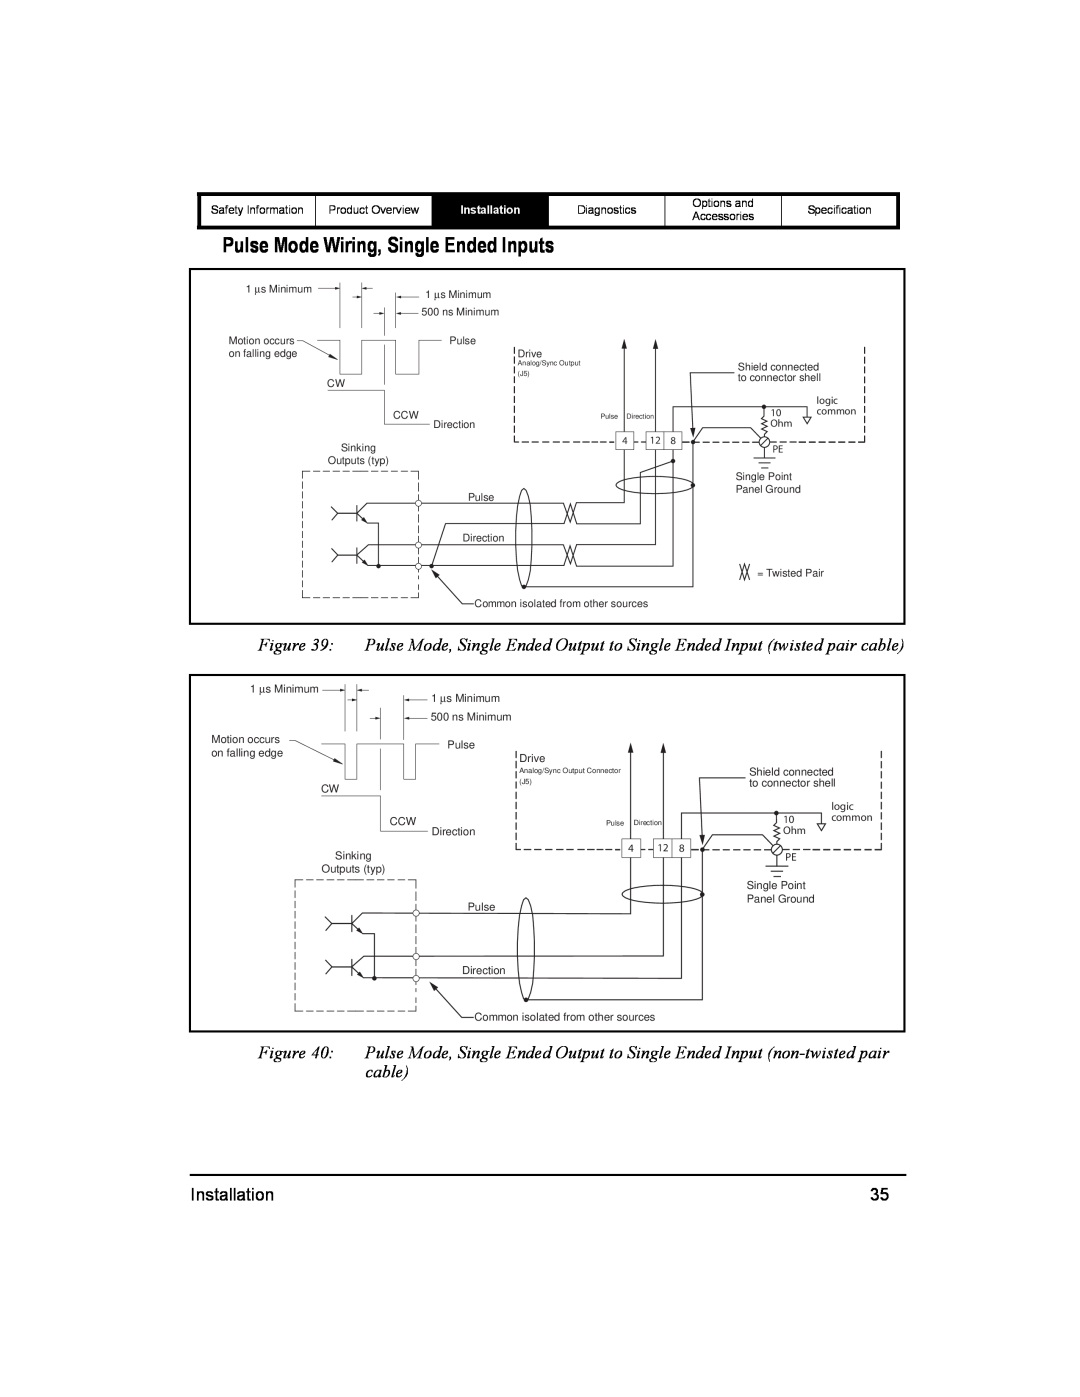 Emerson 400518-01 installation manual Pulse Mode Wiring, Single Ended Inputs 